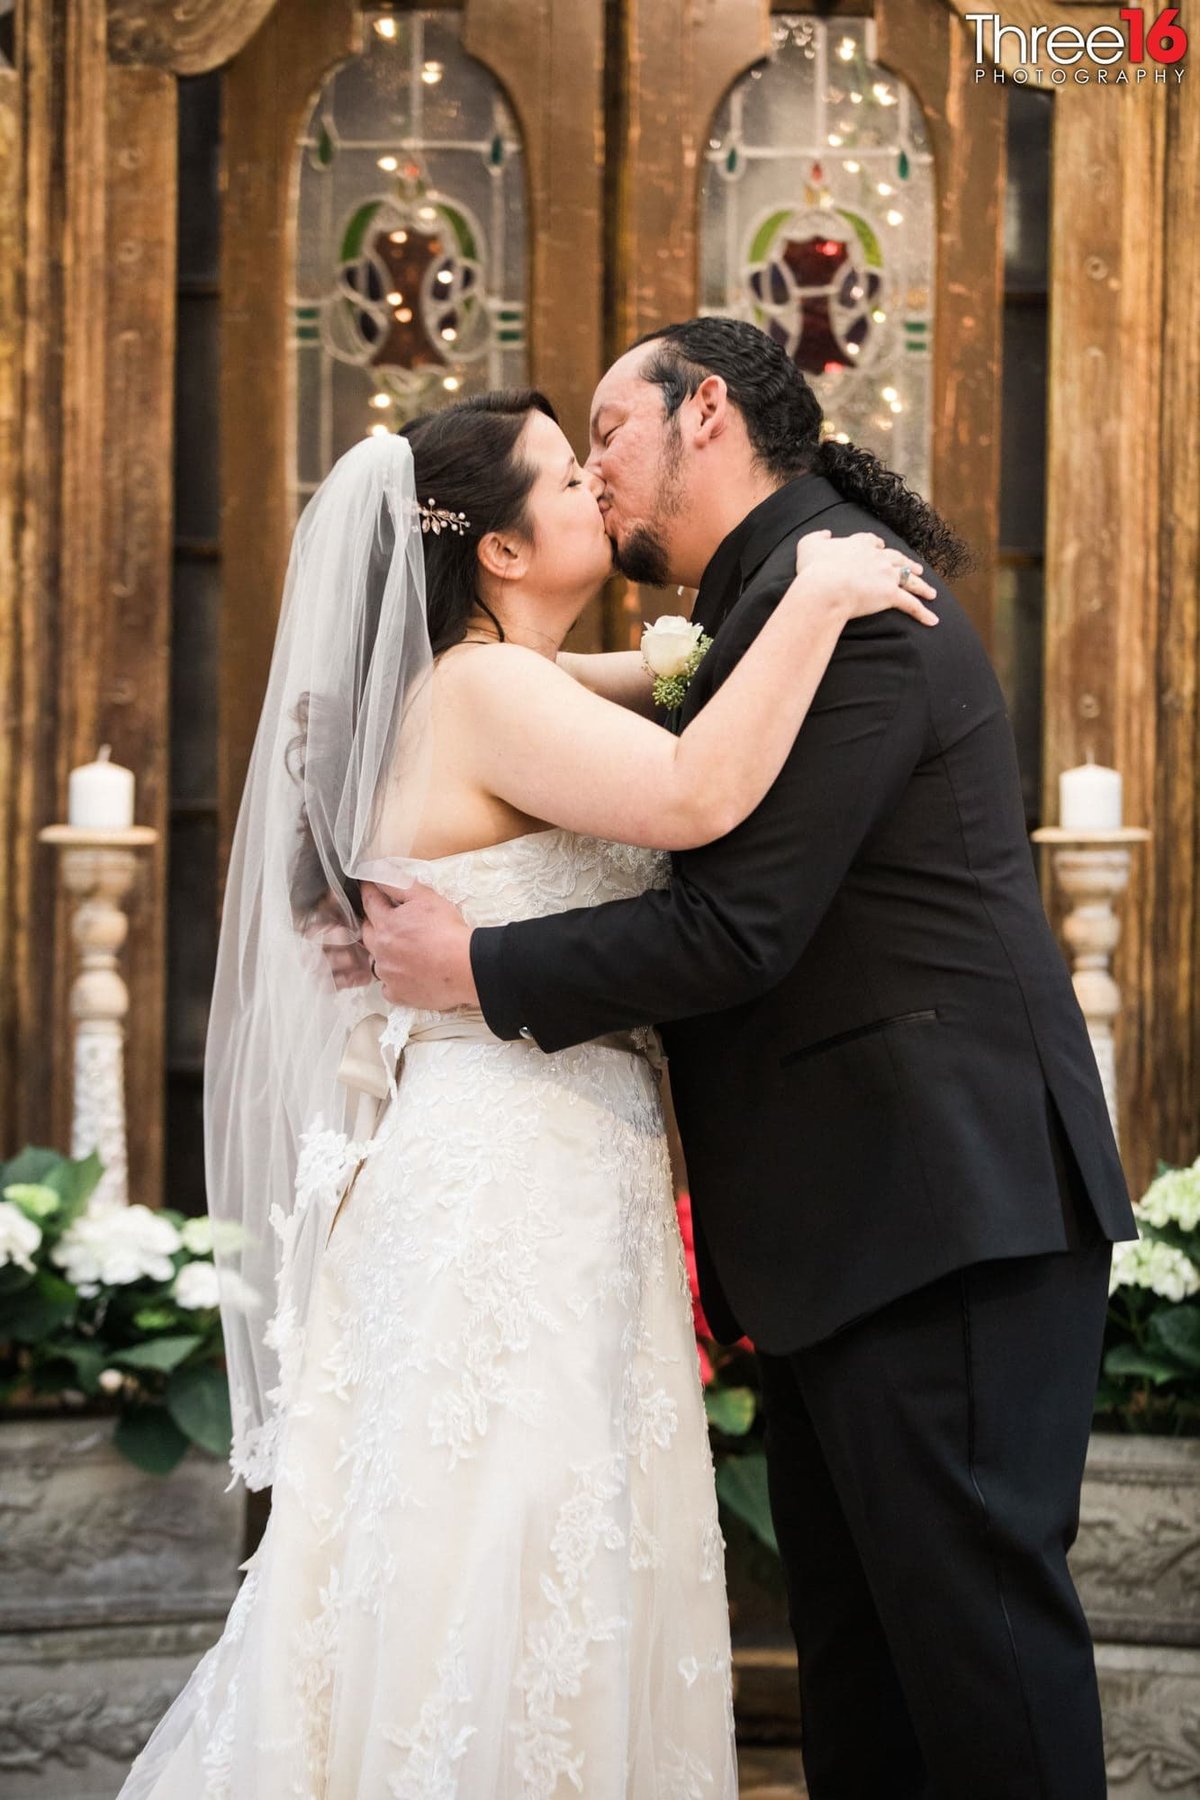 Newly married couple share their first kiss at the altar